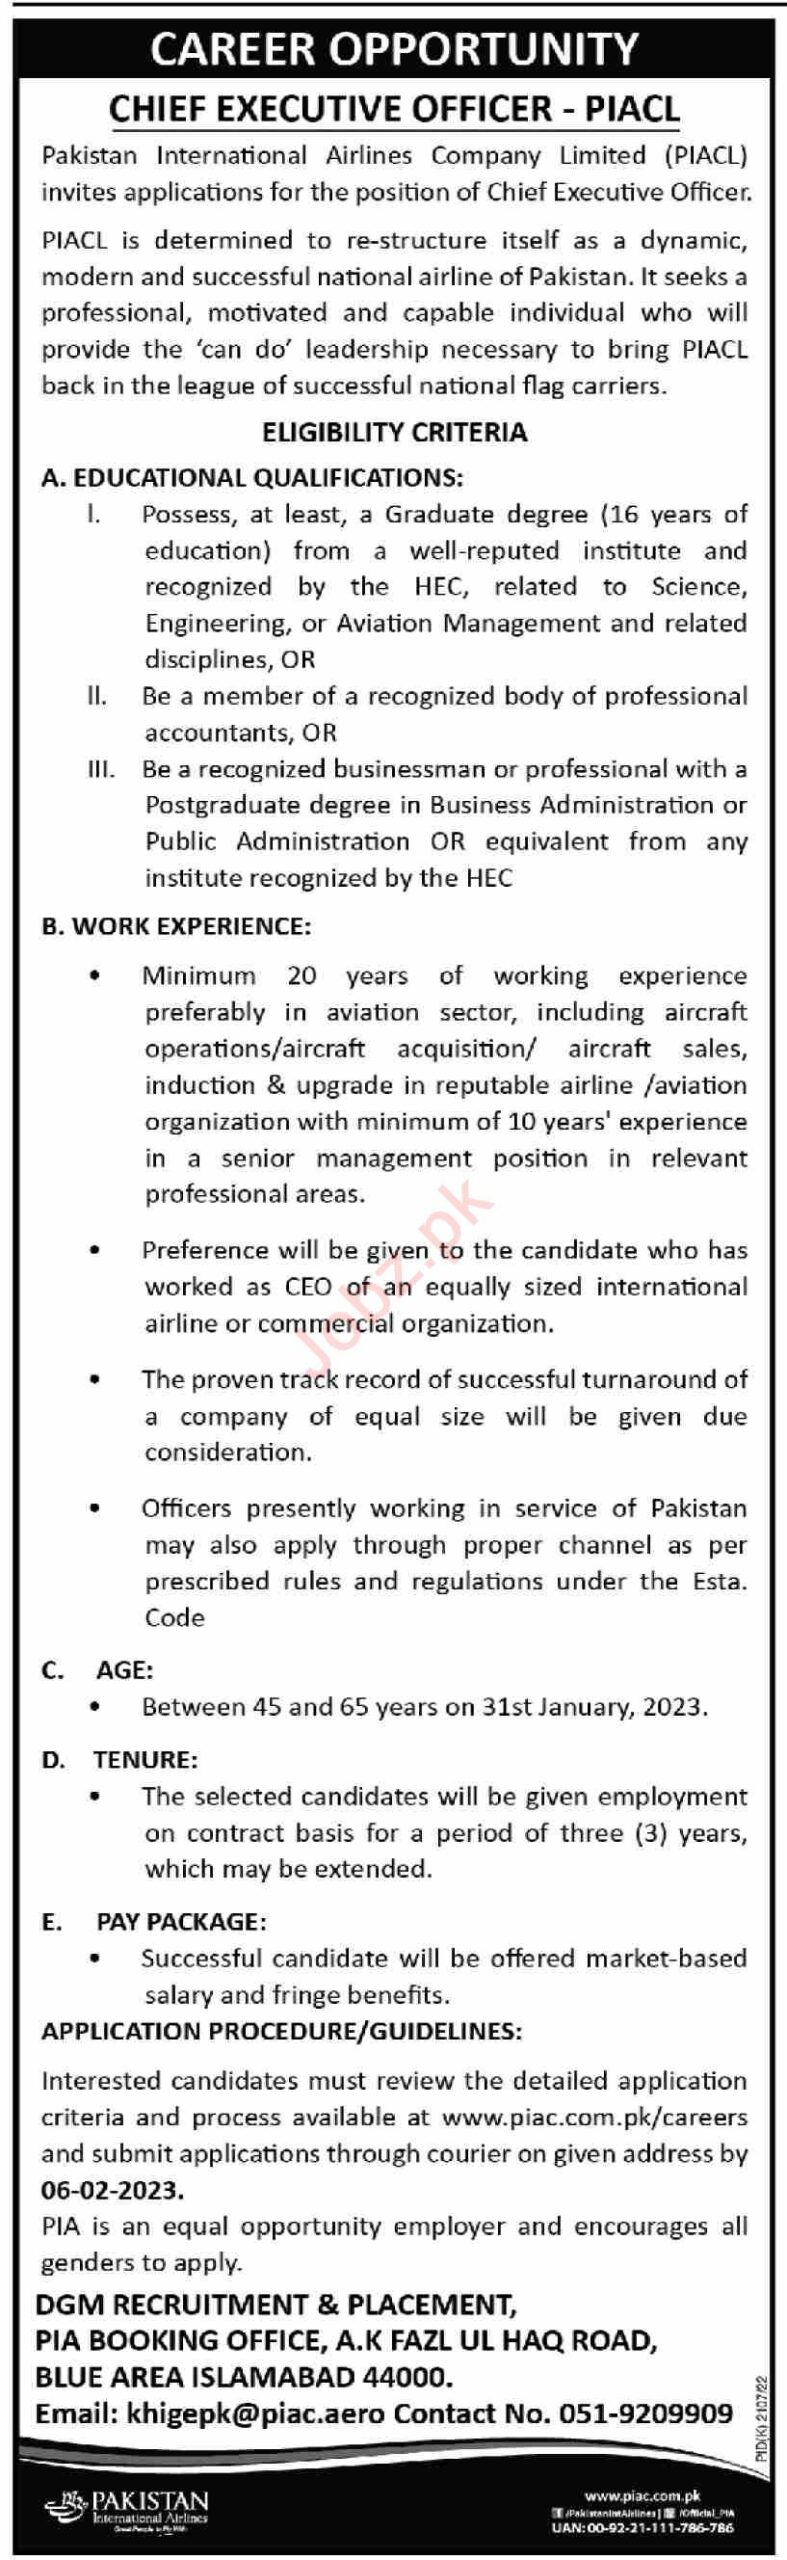 Jobs In Pakistan International Airlines Company Limited